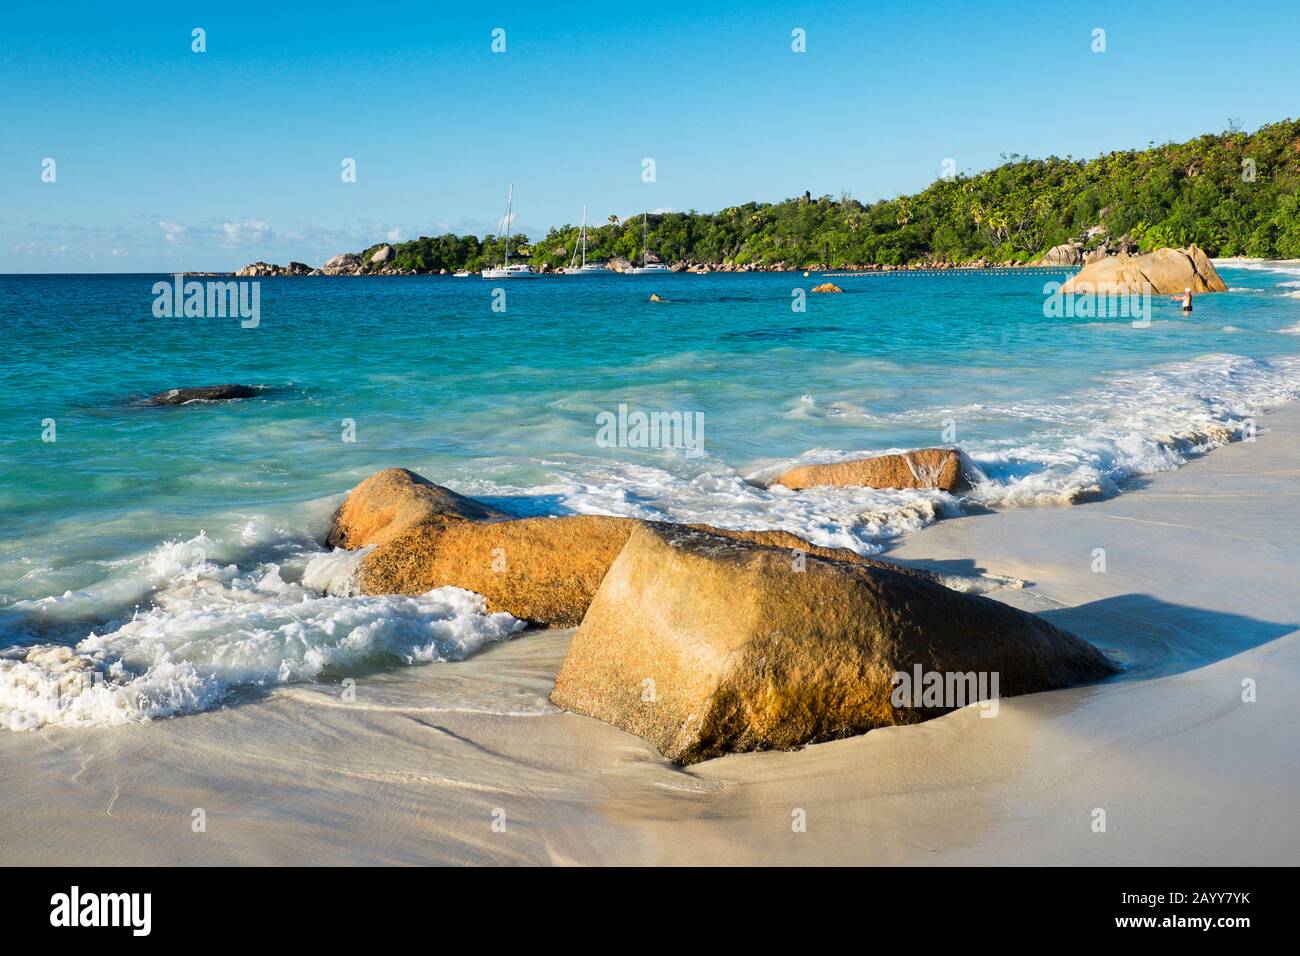 Waves rolling in on Anse Lazio beach and sailboats ancored near Pointe Chevalier on Praslin Island, Seychelles Stock Photo